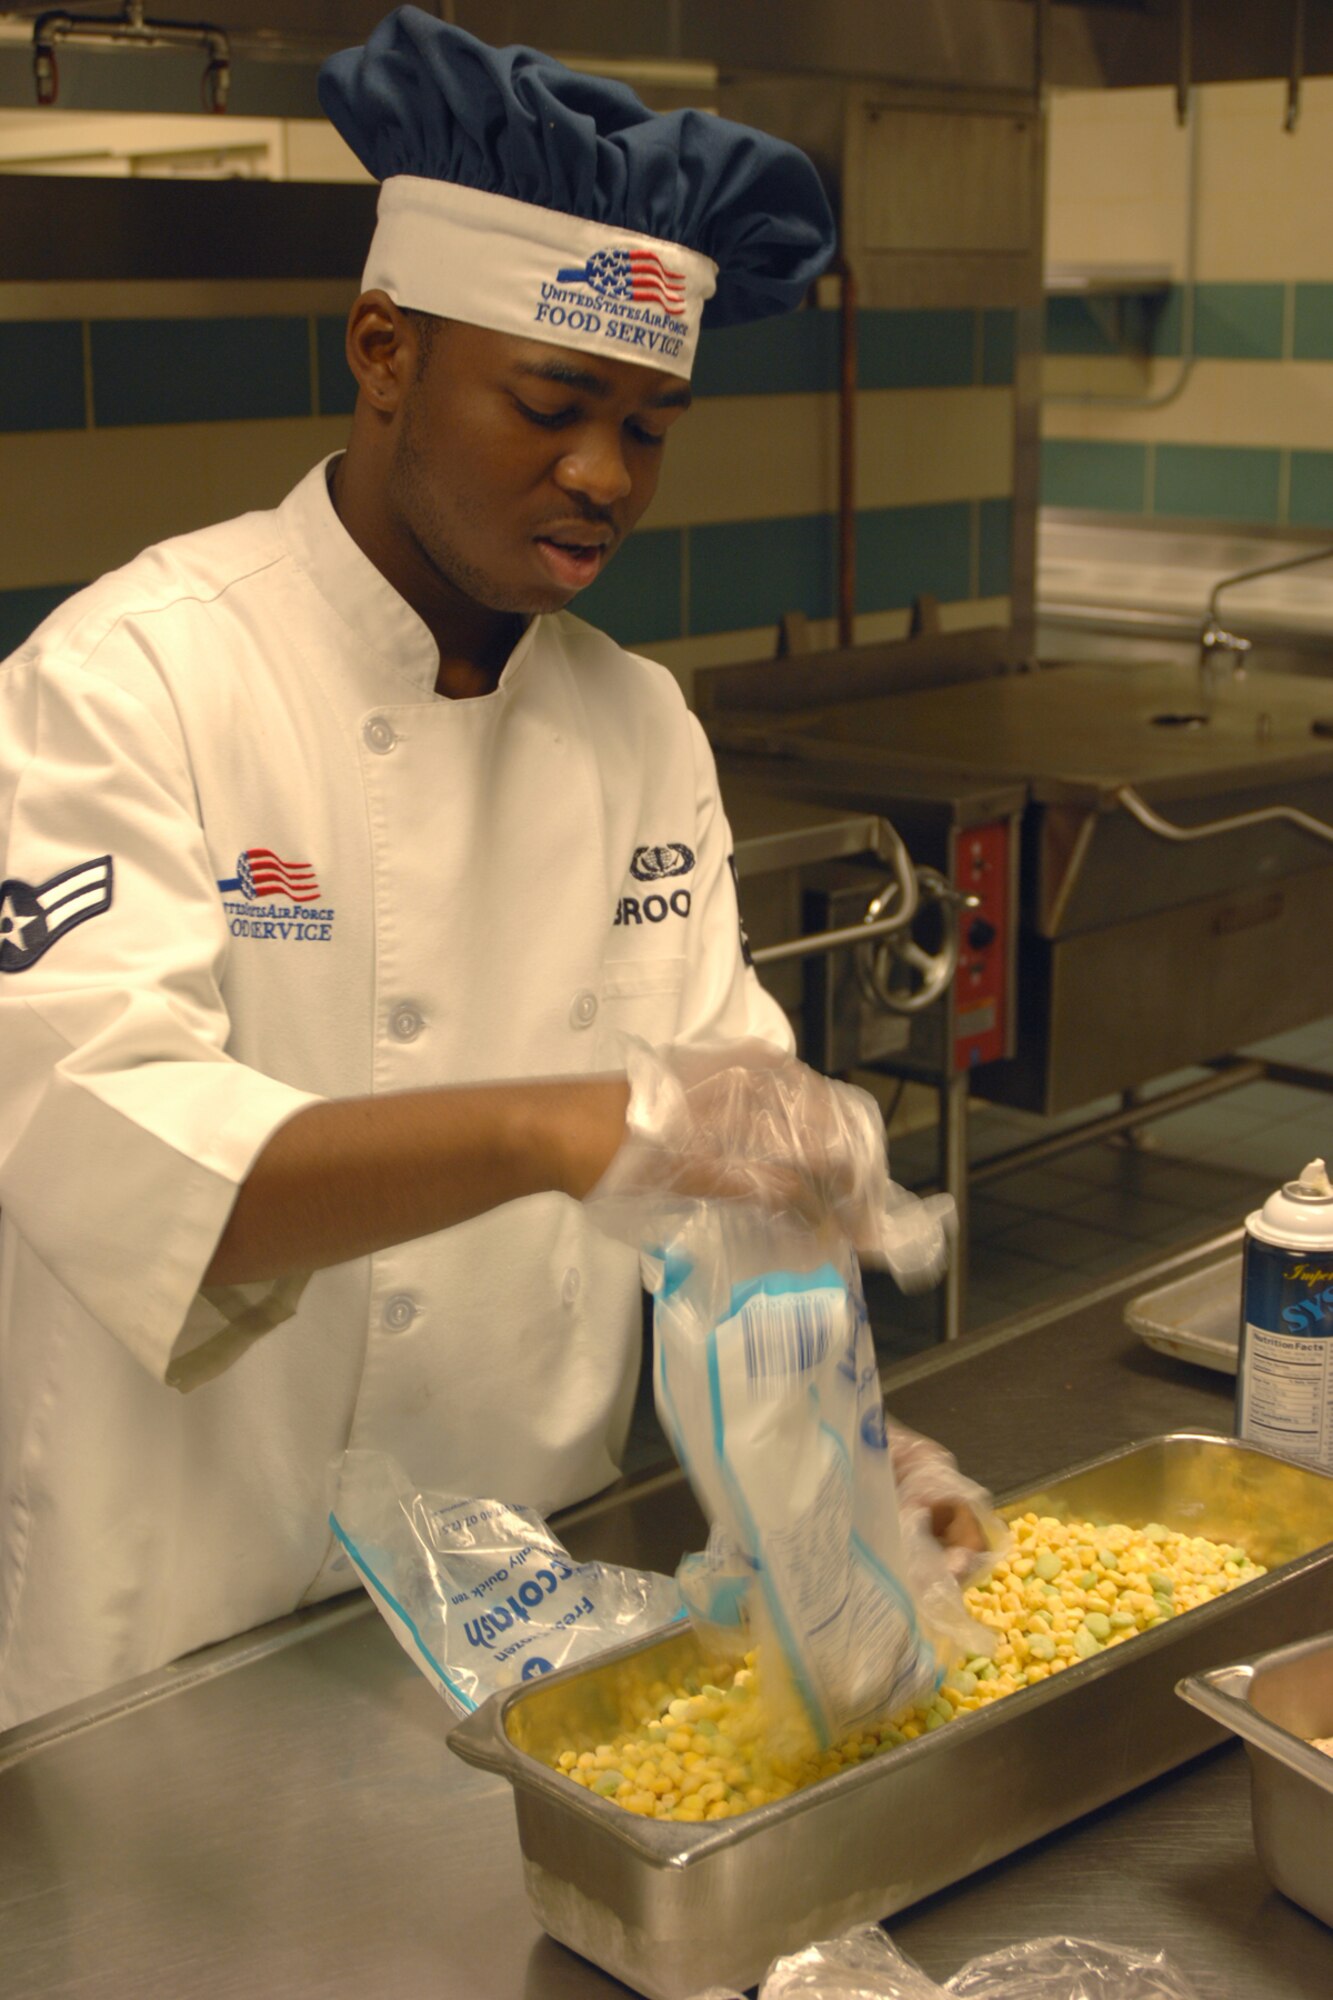 Airman 1st Class Derranda Brooks, 4th Force Support Squadron food service apprentice, prepares corn for dinner at the Southern Eagle Dining Facility on Seymour Johnson Air Force Base, N.C., June 16, 2009. Airman Brooks has worked at the dining facility for more than a year and customer service is his favorite part of the job. (U.S. Air Force photo by 2nd Lieutenant Joel Banjo-Johnson)